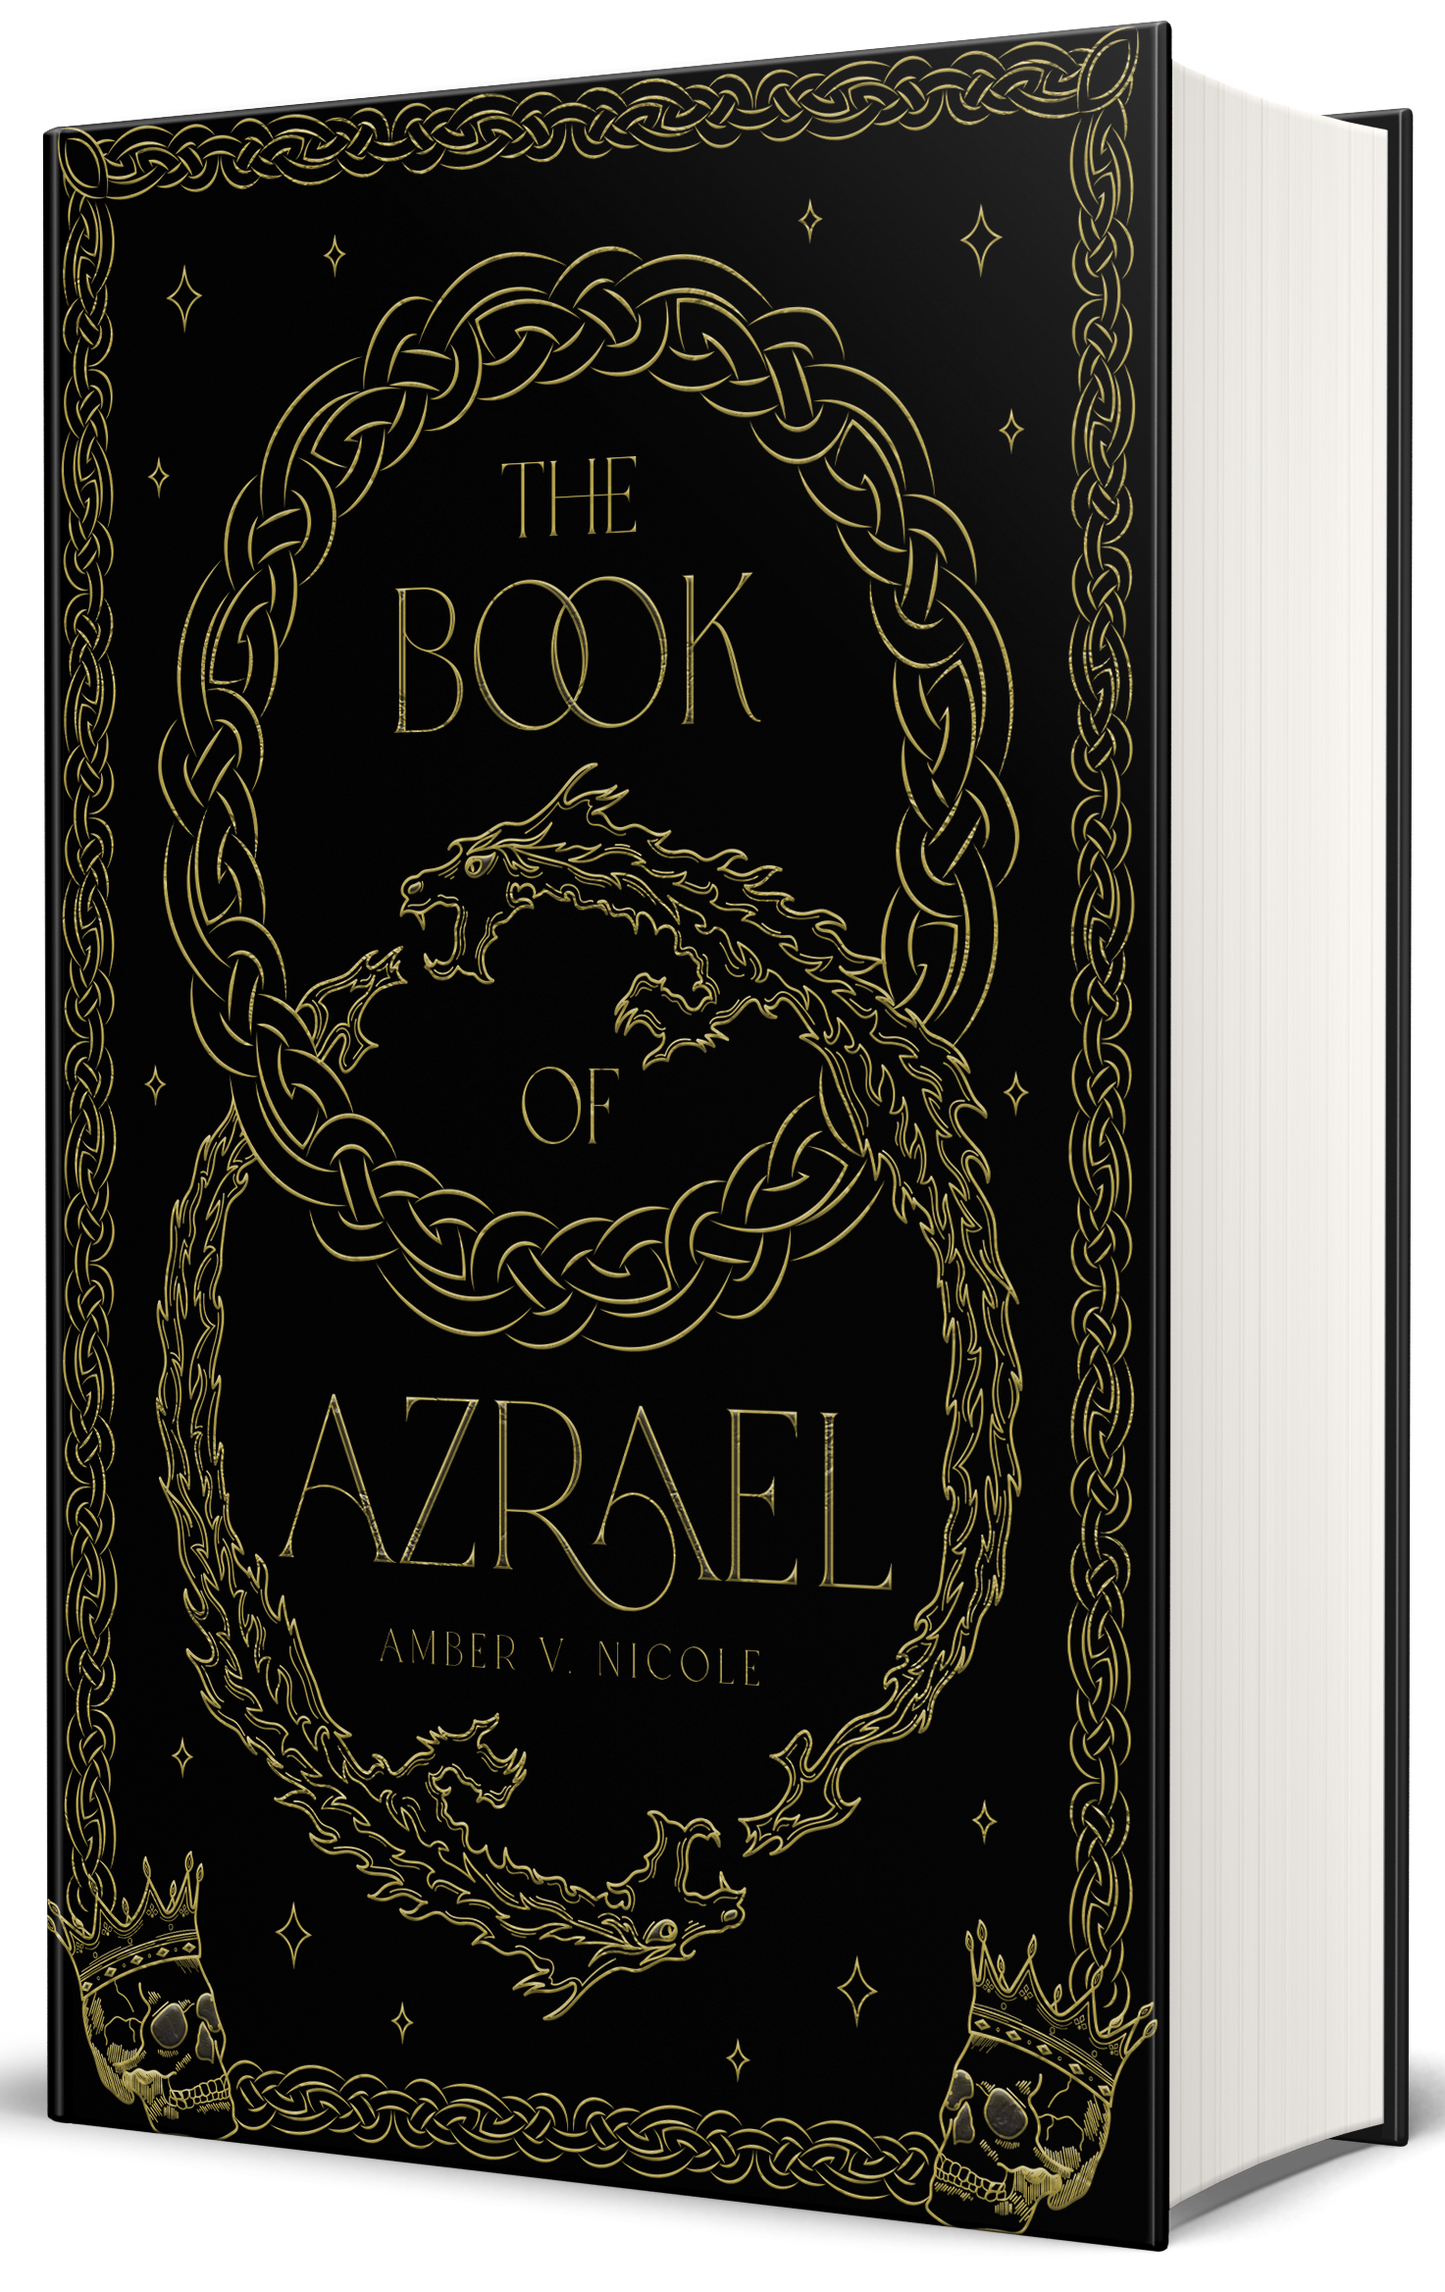 ✨PREORDER  PICKUP ONLY✨ Apollycon Signing Exclusive of The Book of Azrael